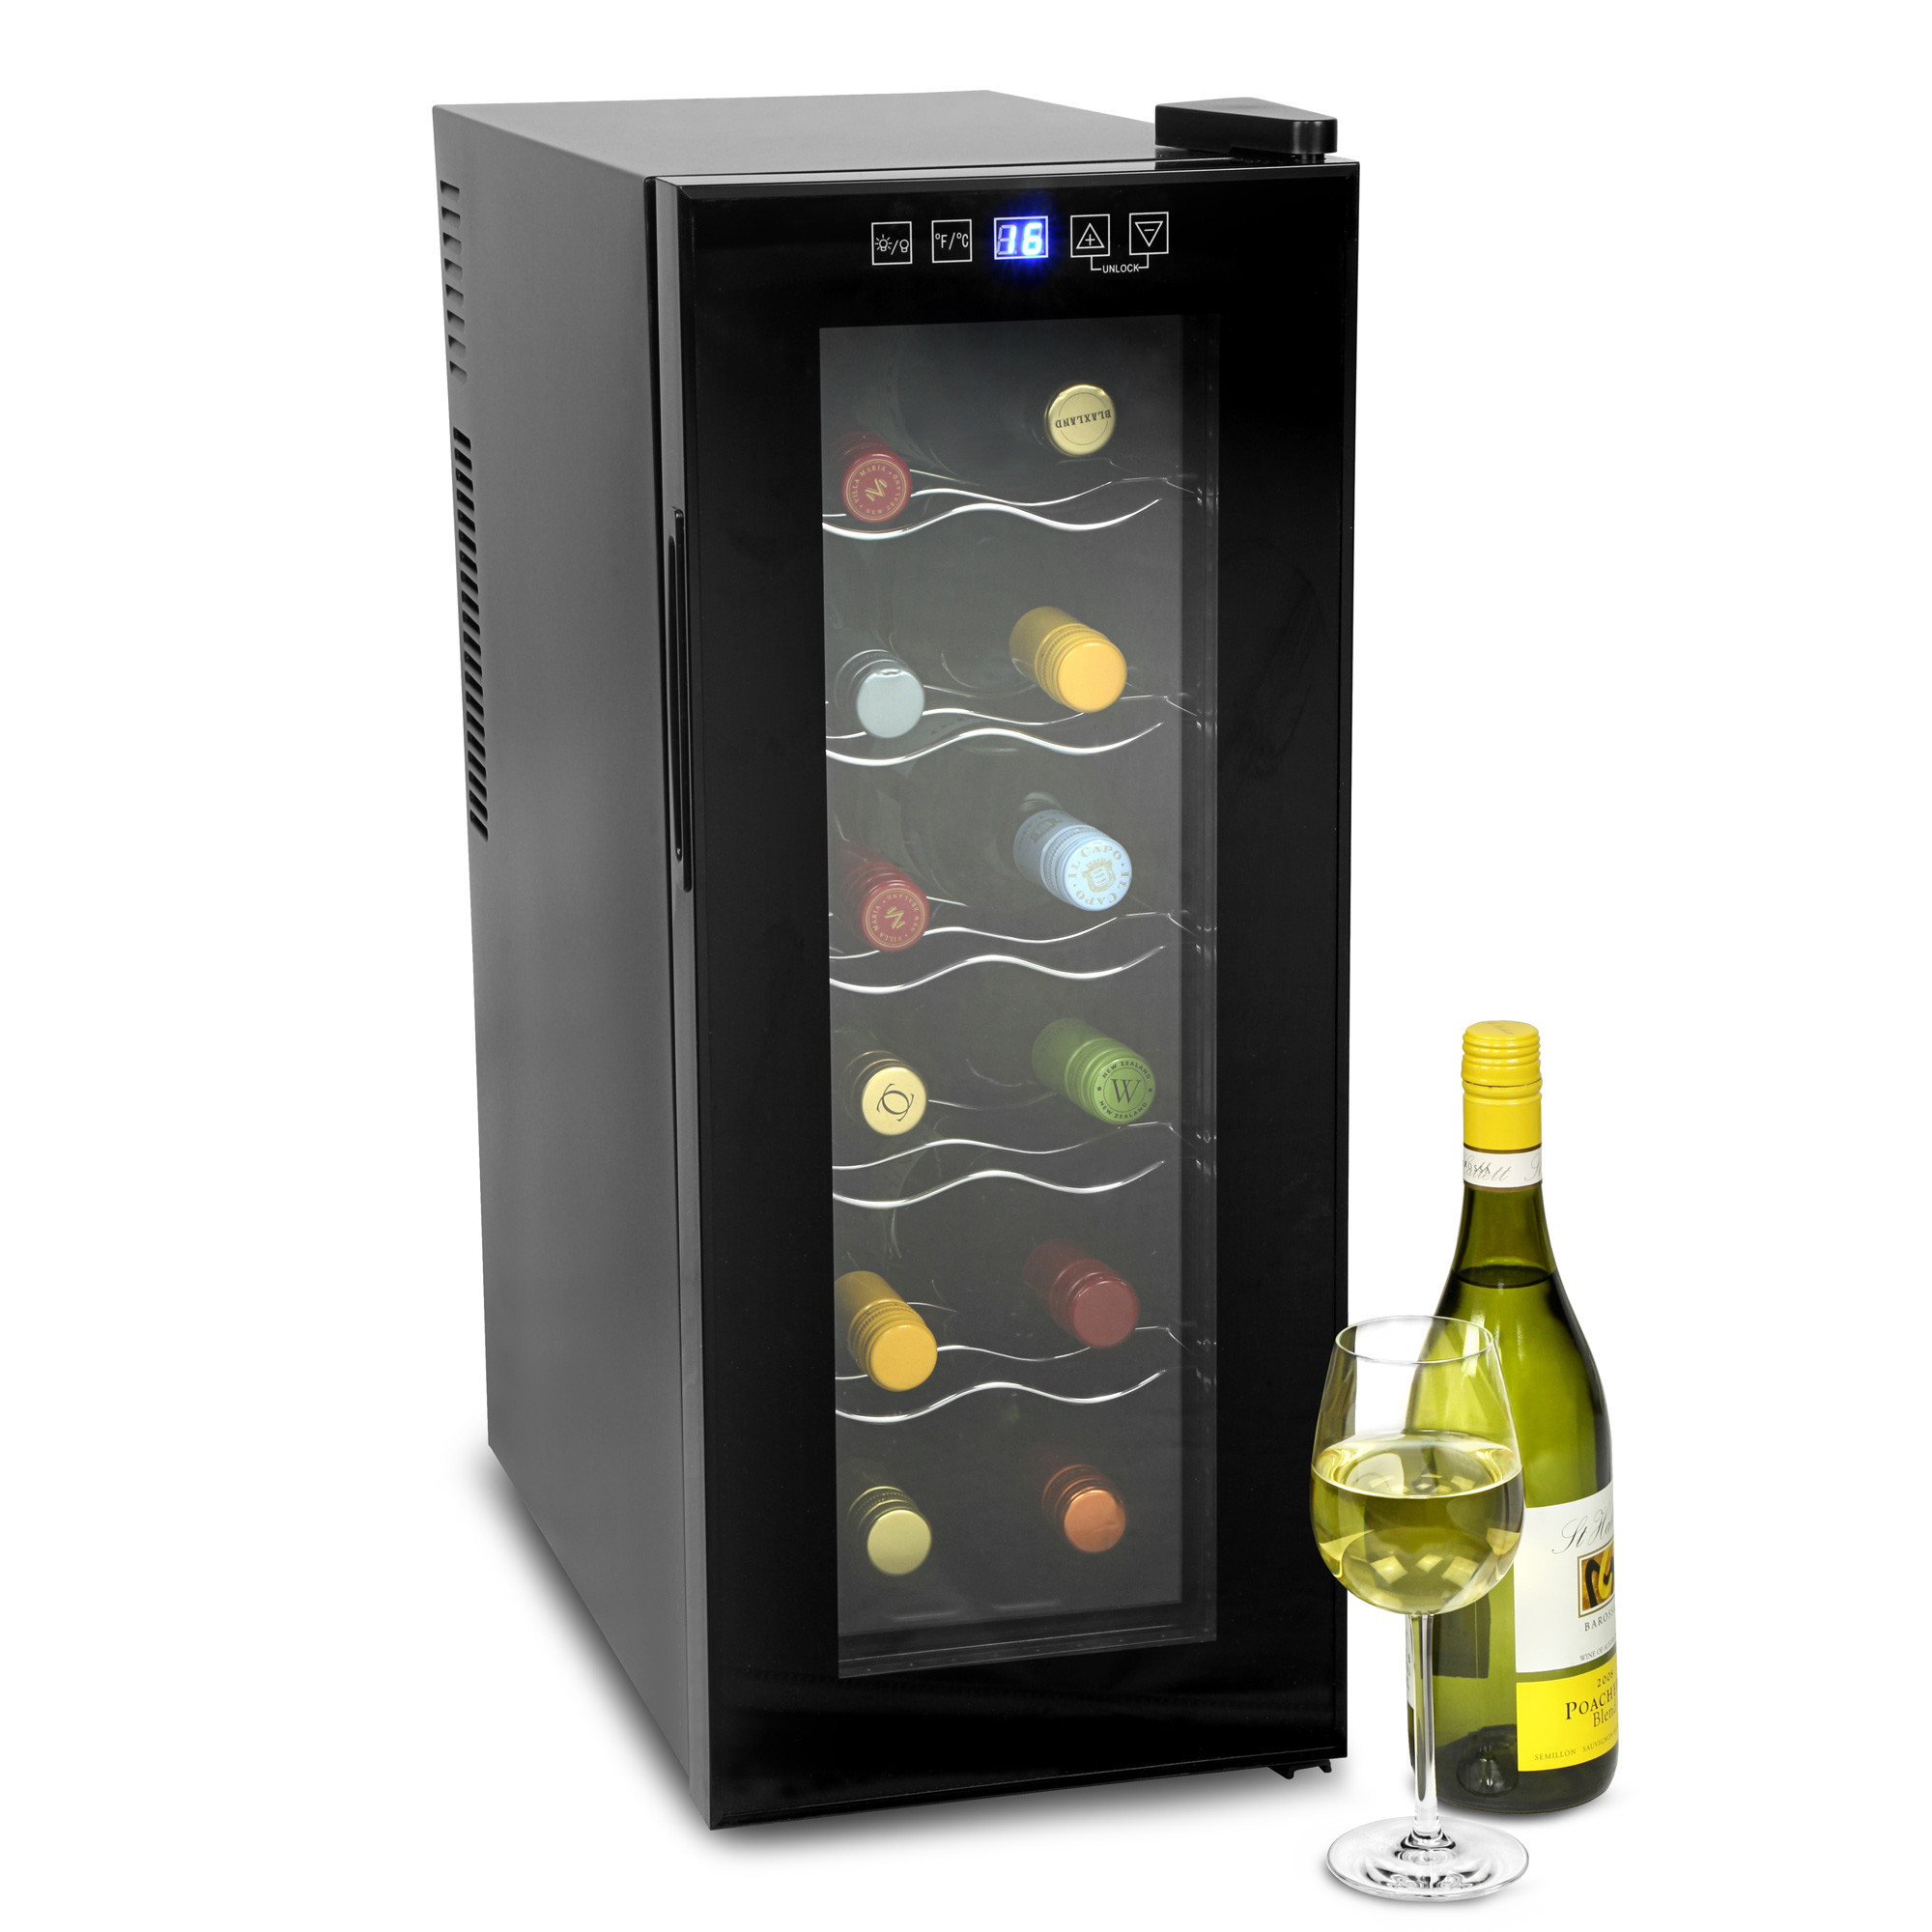 Best ideas about Wine Cellar Cooler
. Save or Pin VinoTech 12 Bottle Wine Cellar Bottle Cooler at drinkstuff Now.